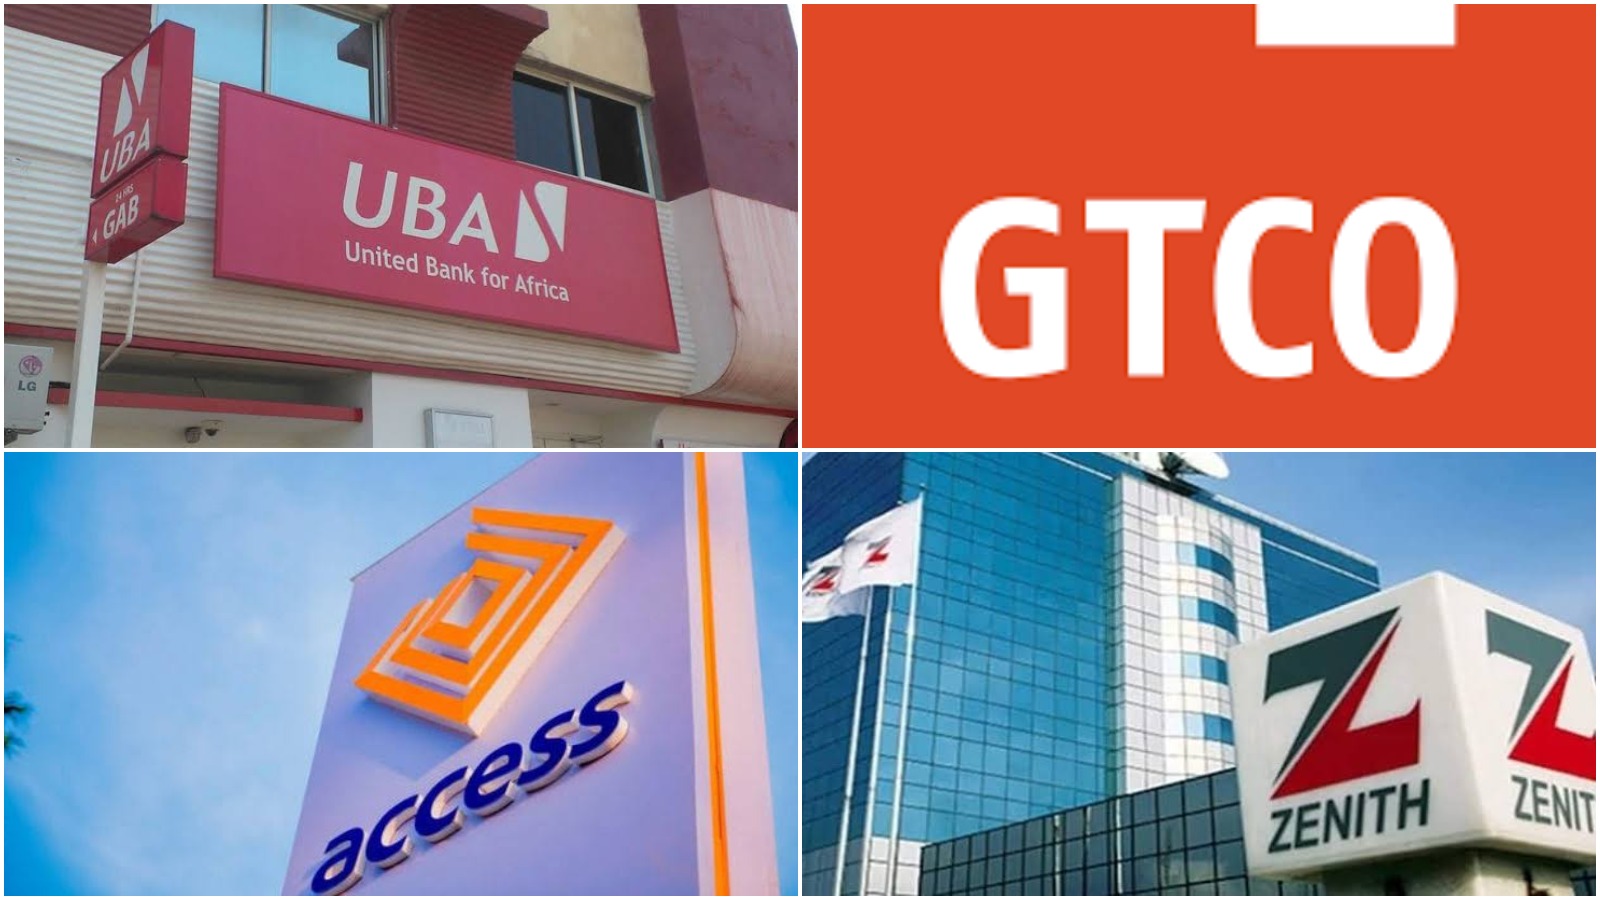 UBA displaces GTCO as Nigeria’s most valuable listed bank